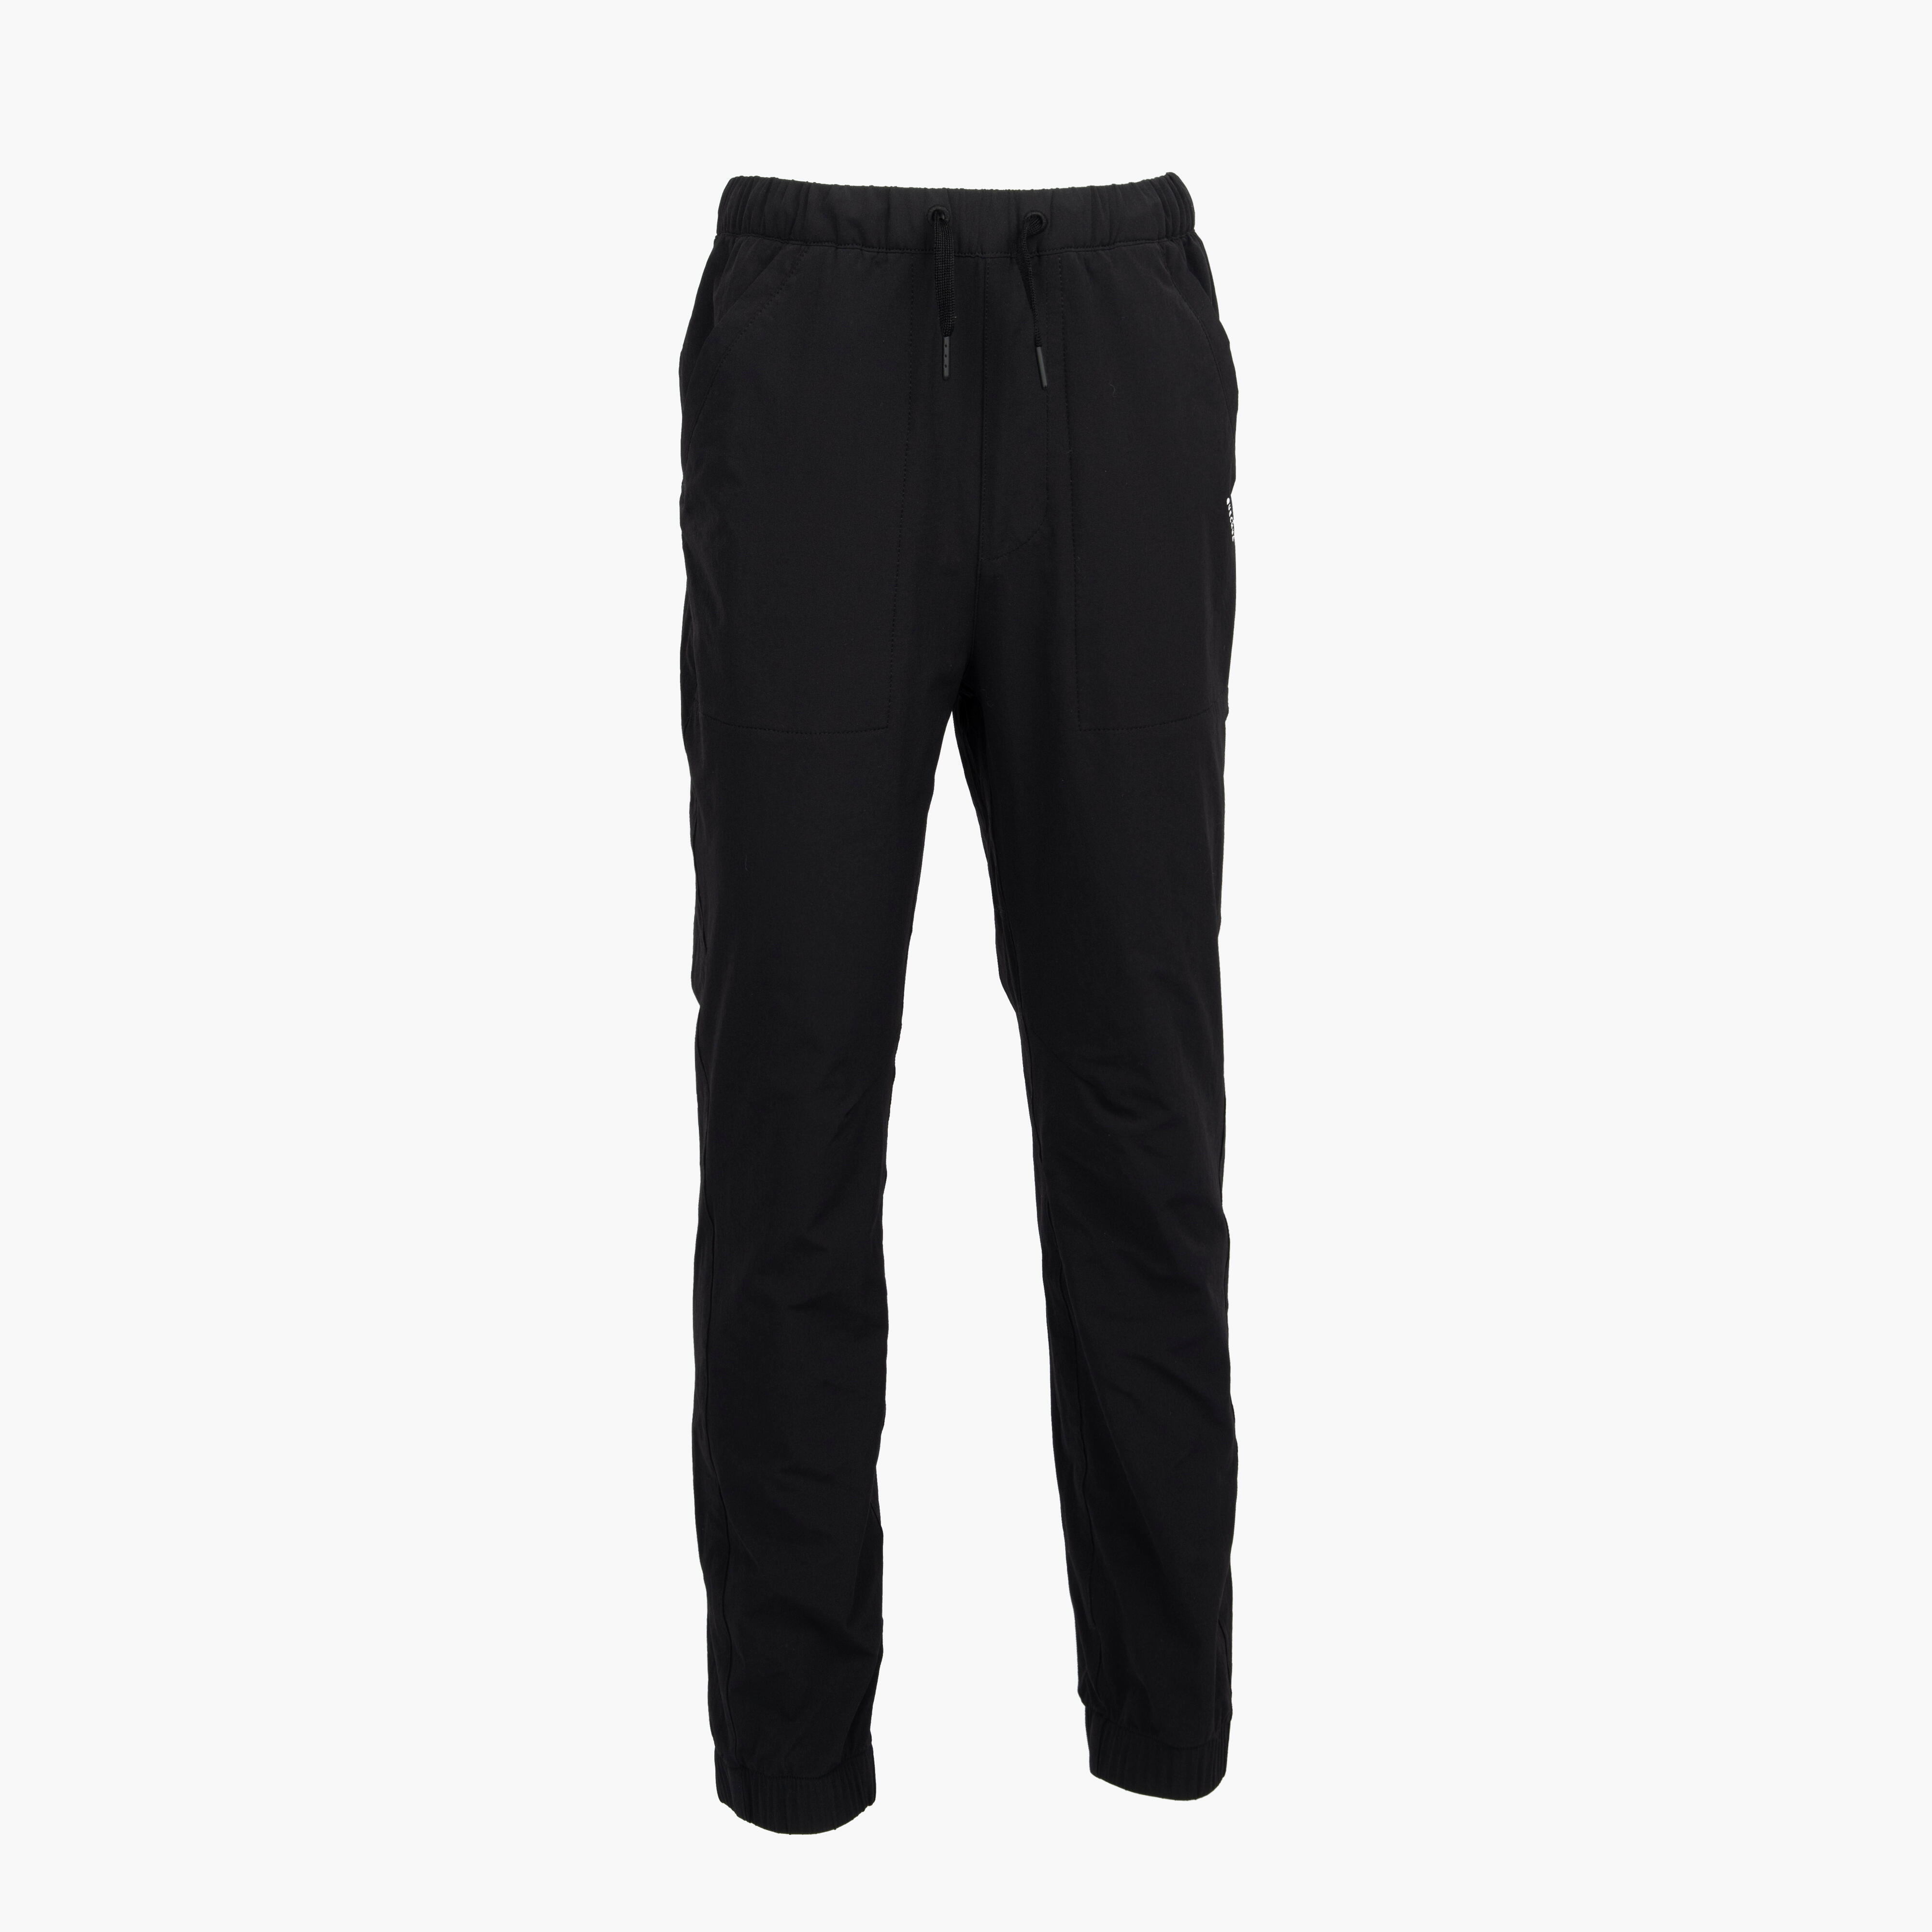 Affordable decathlon track pants For Sale  Activewear  Carousell  Singapore